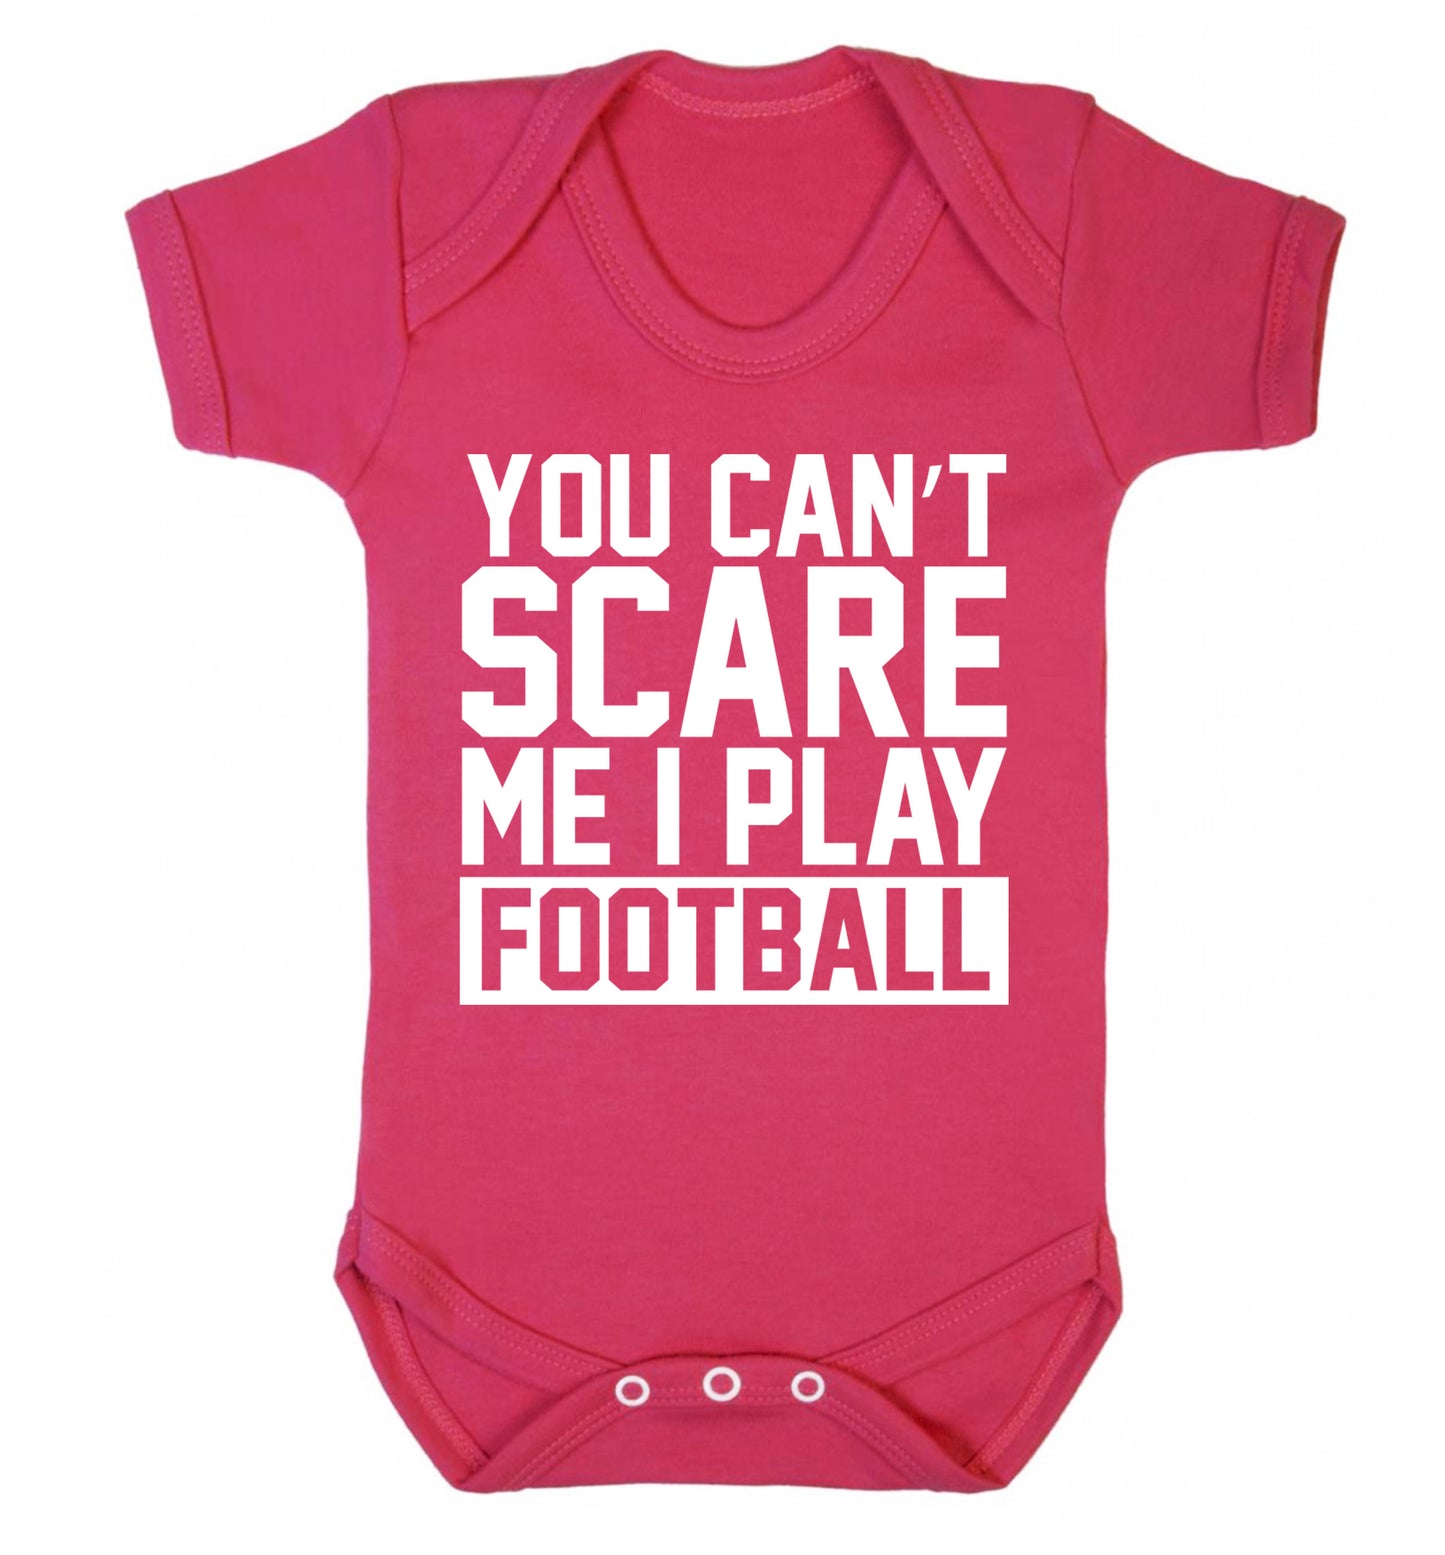 You can't scare me I play football Baby Vest dark pink 18-24 months